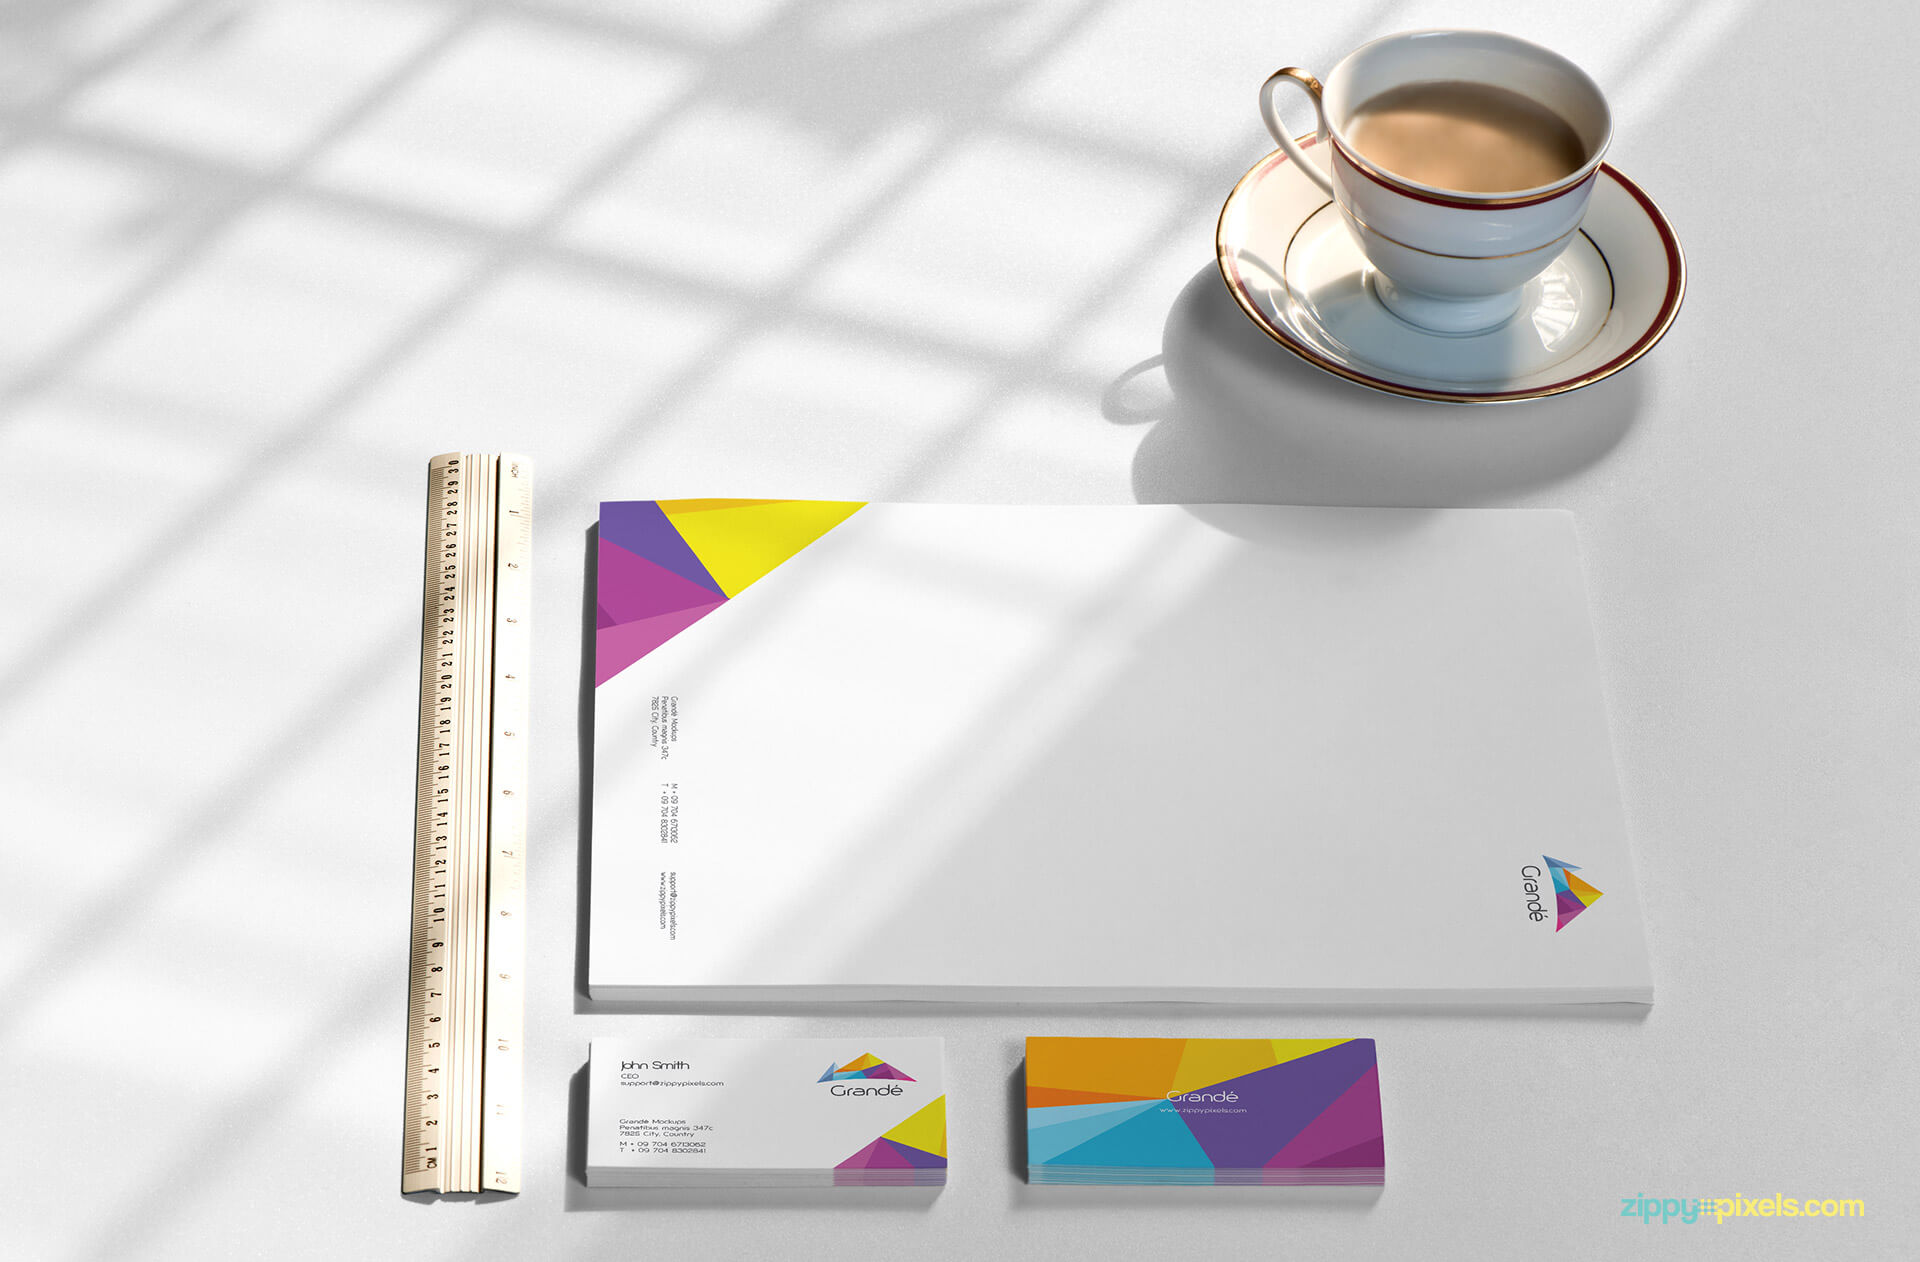 Letterhead and 2 Stacks of Business Card Mockup with Tea cup & Ruler